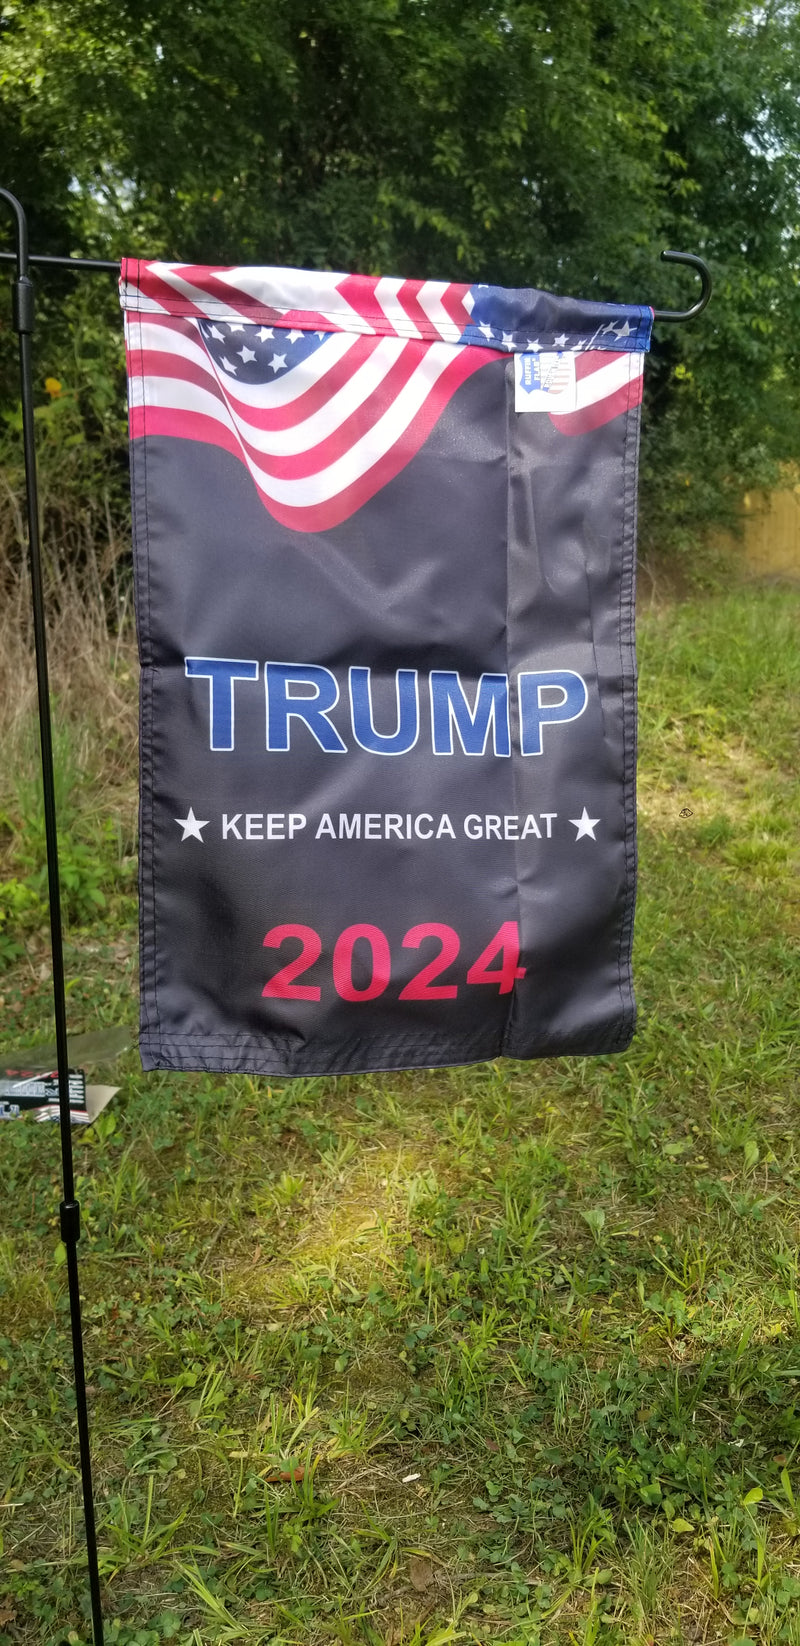 TRUMP 2024 USA Keep America Great American Blackout Garden flag 12x18 Inches Double Sided